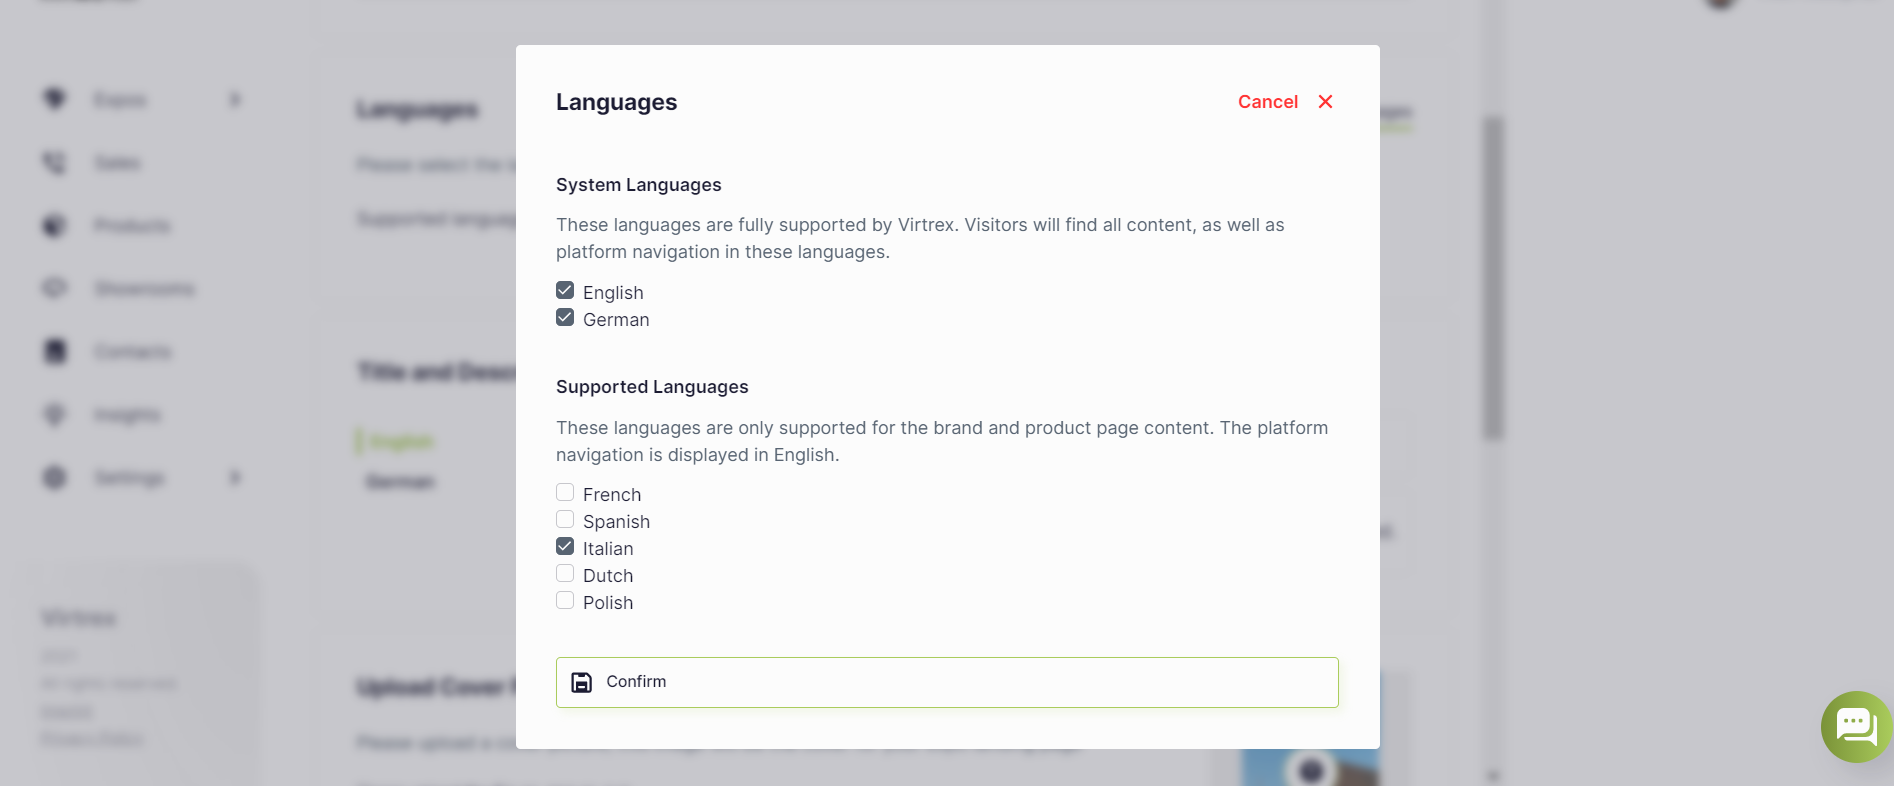 System languages and supported languages